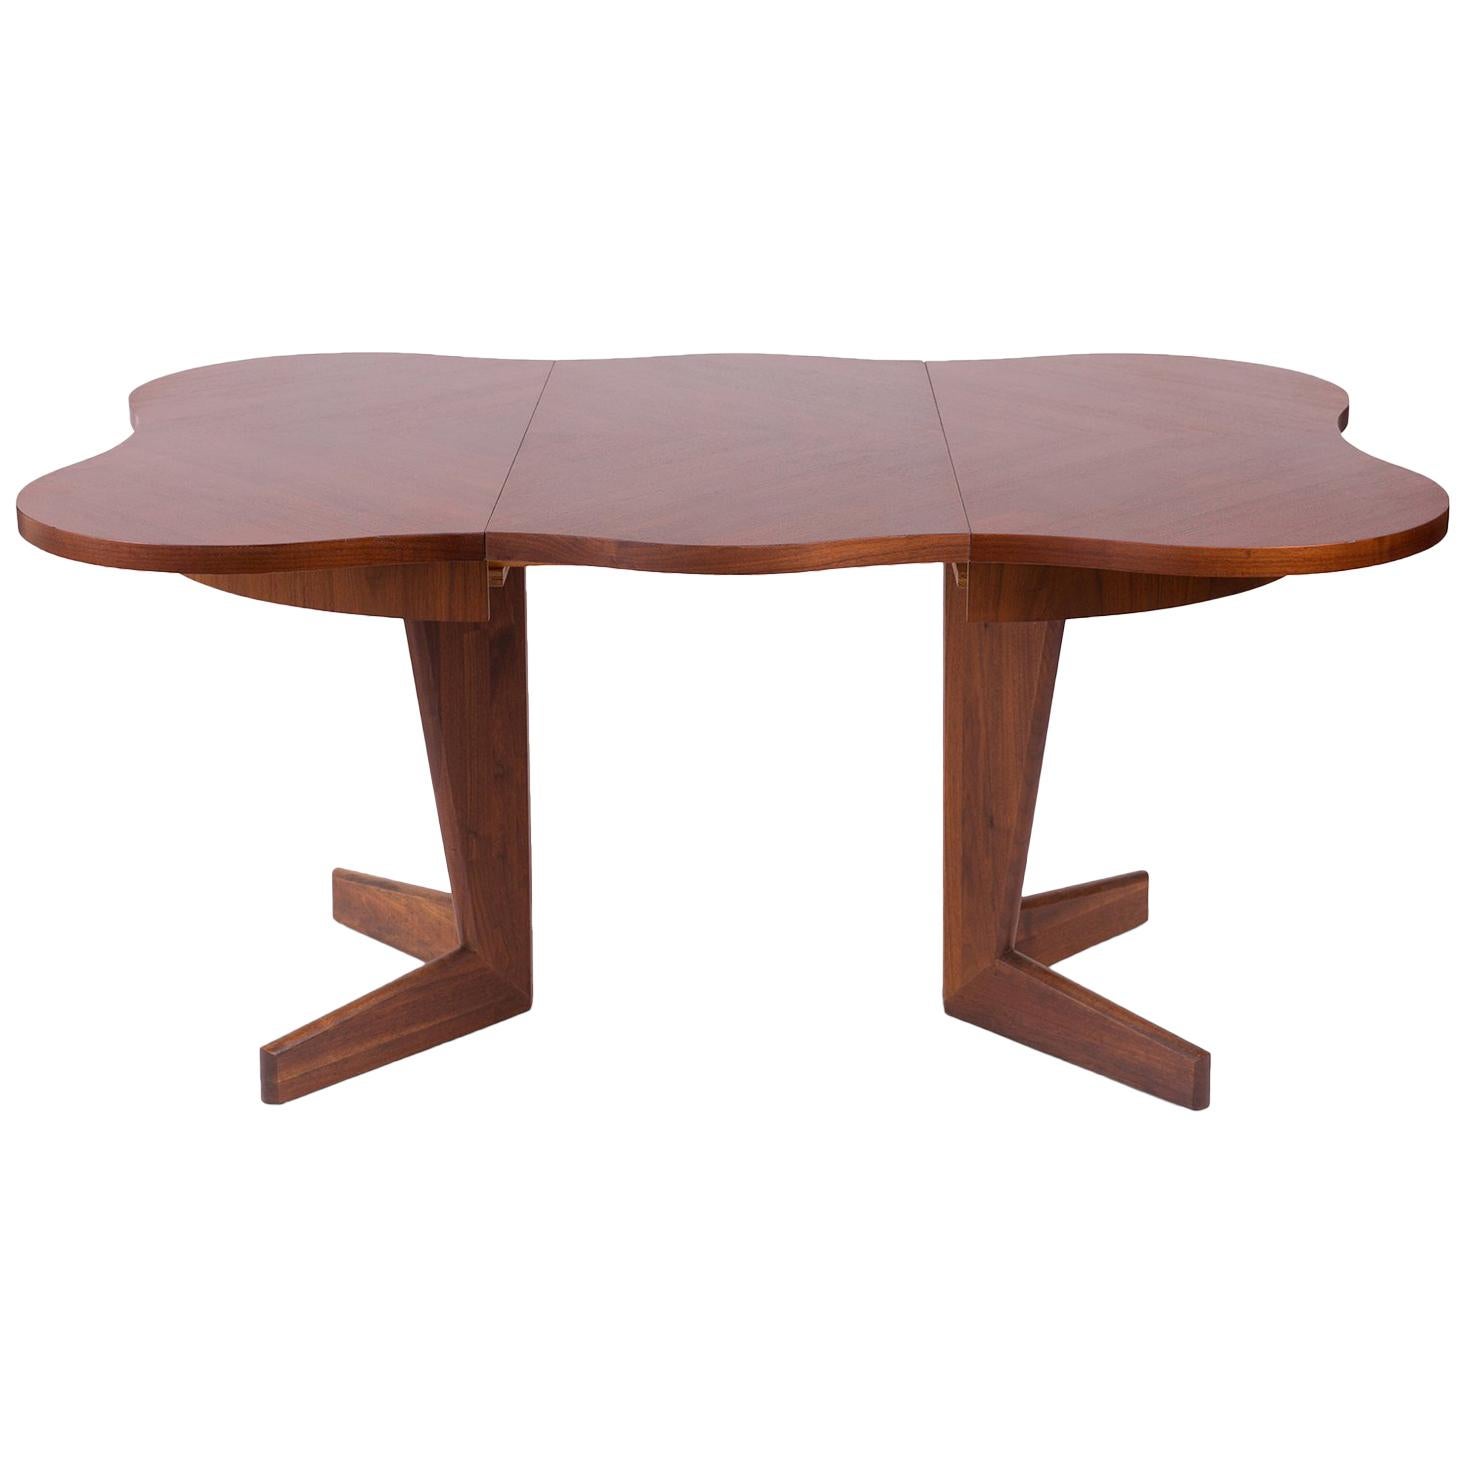 Henry Glass Walnut Extendable Dining Table